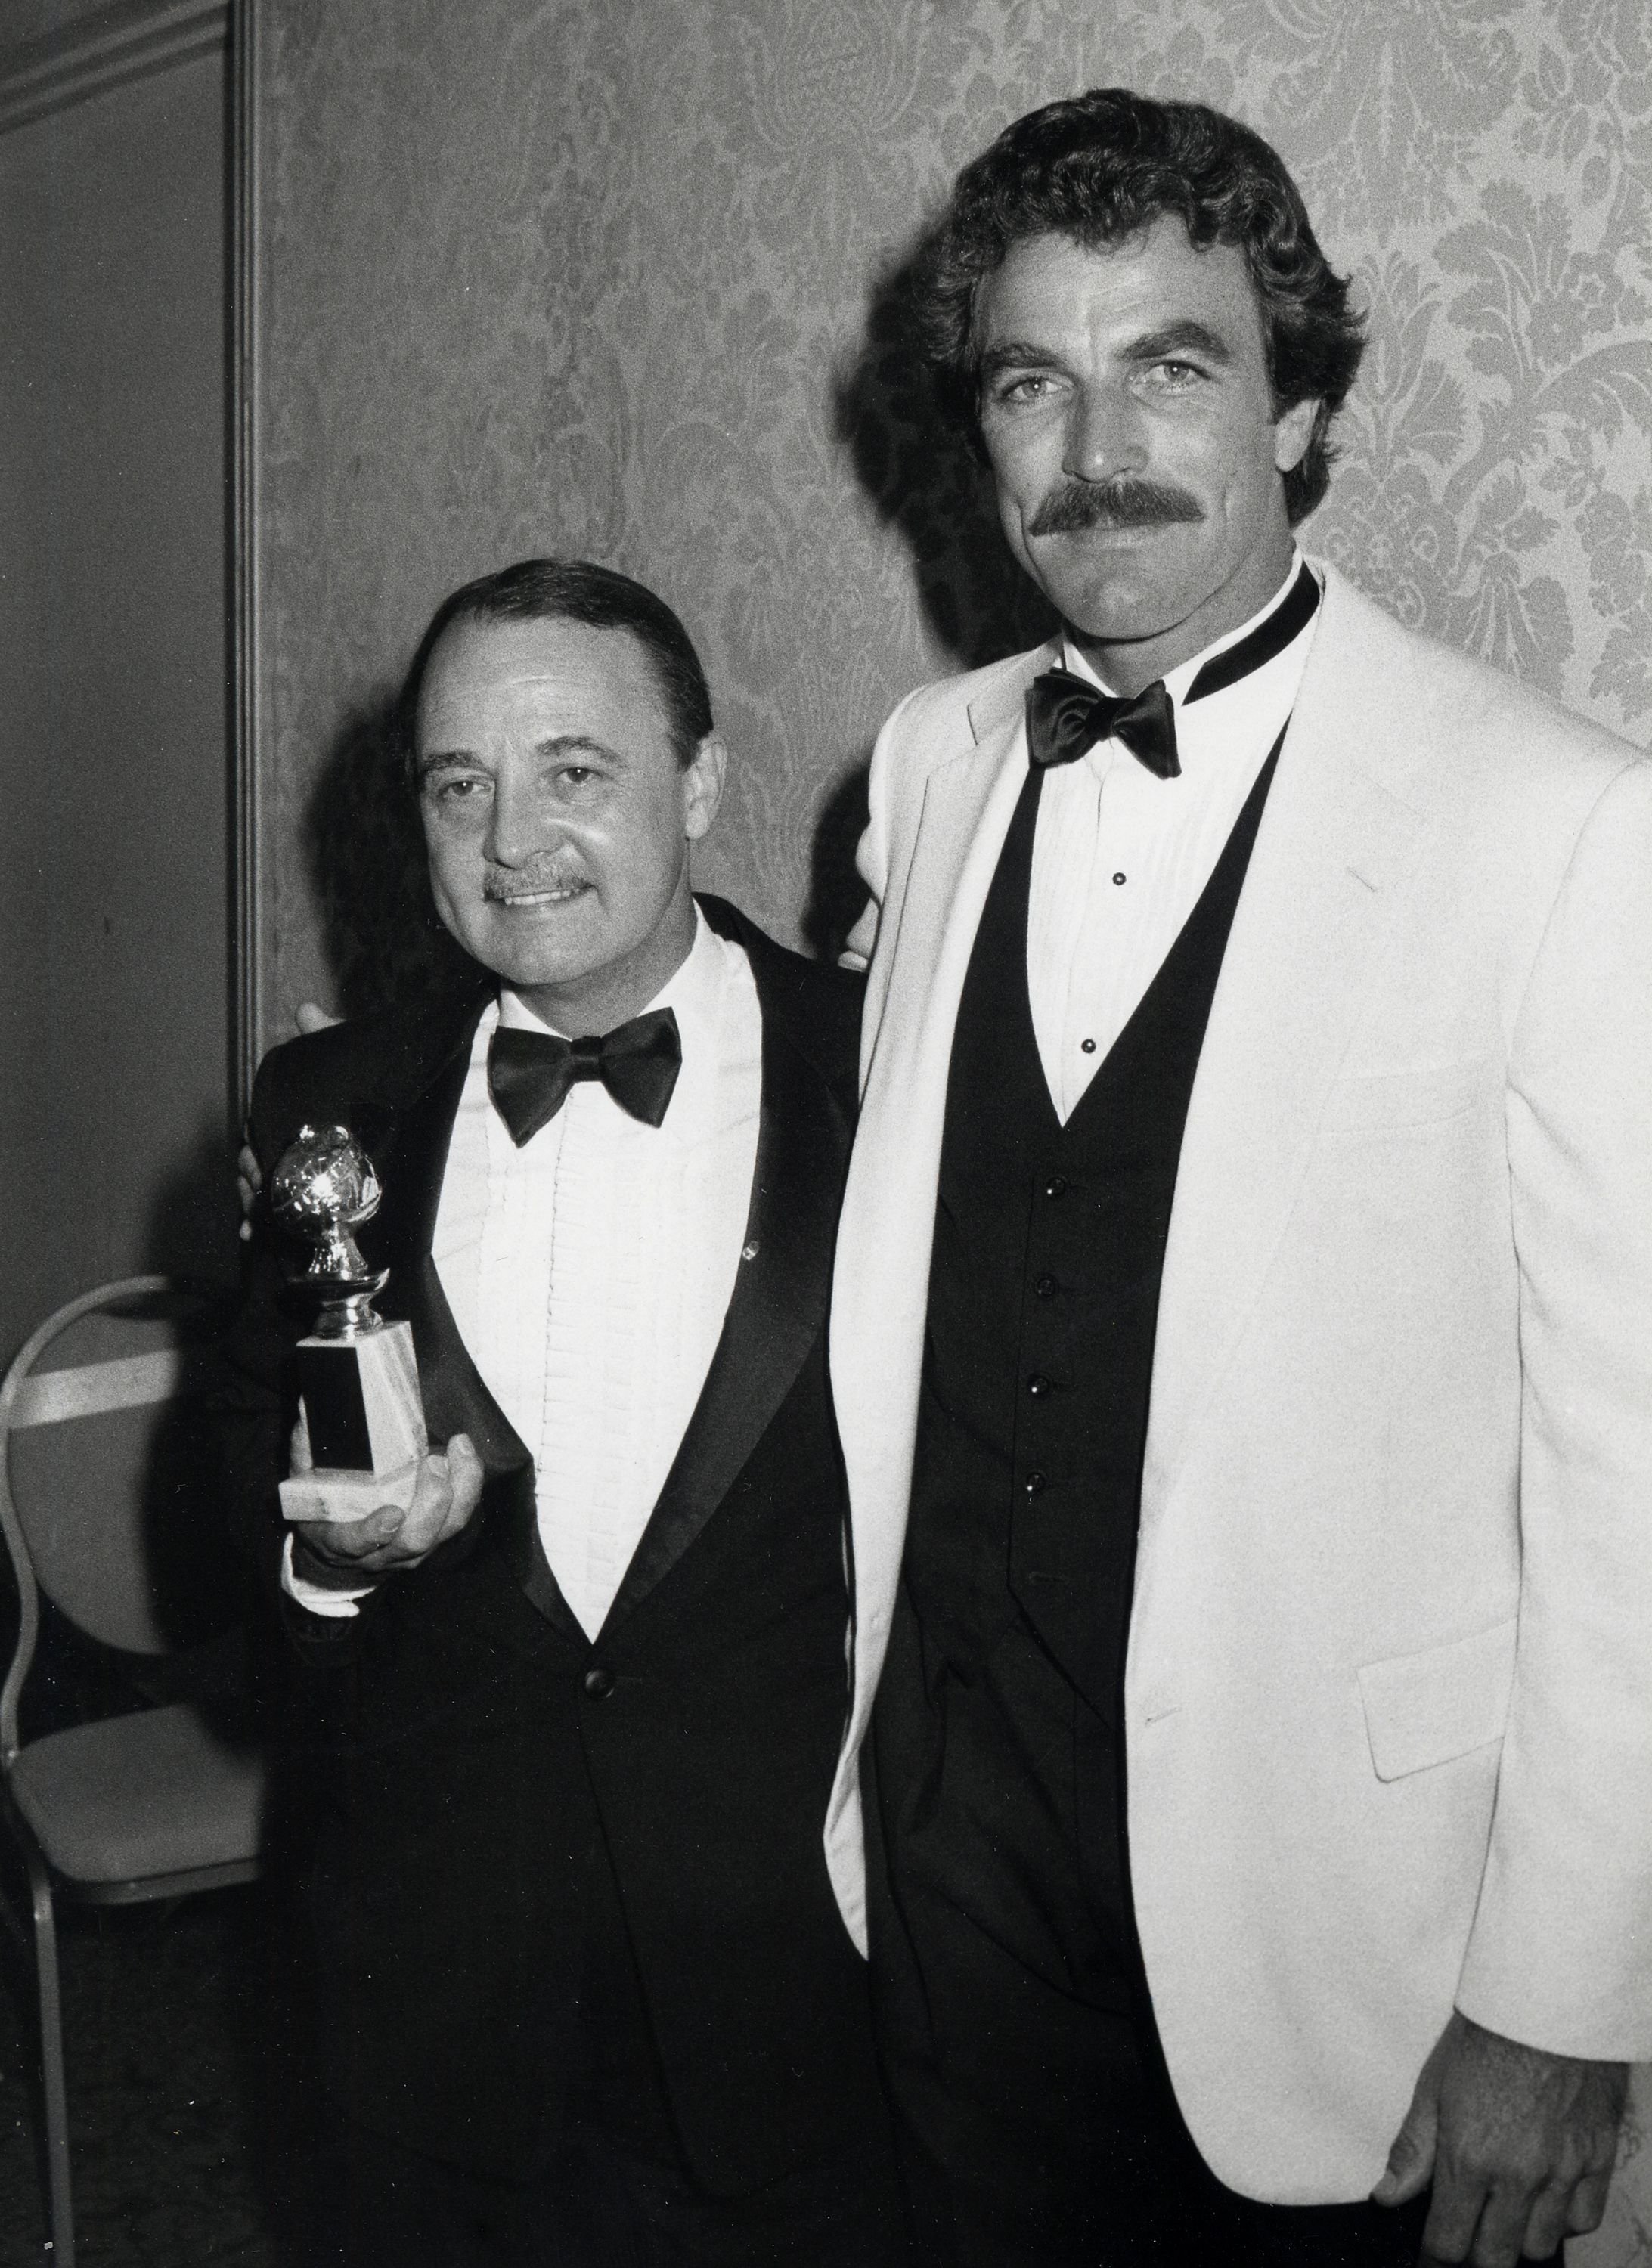 John Hillerman and Tom Selleck during 39th Annual Golden Globe Awards in Beverly Hills | Surce: Getty Images